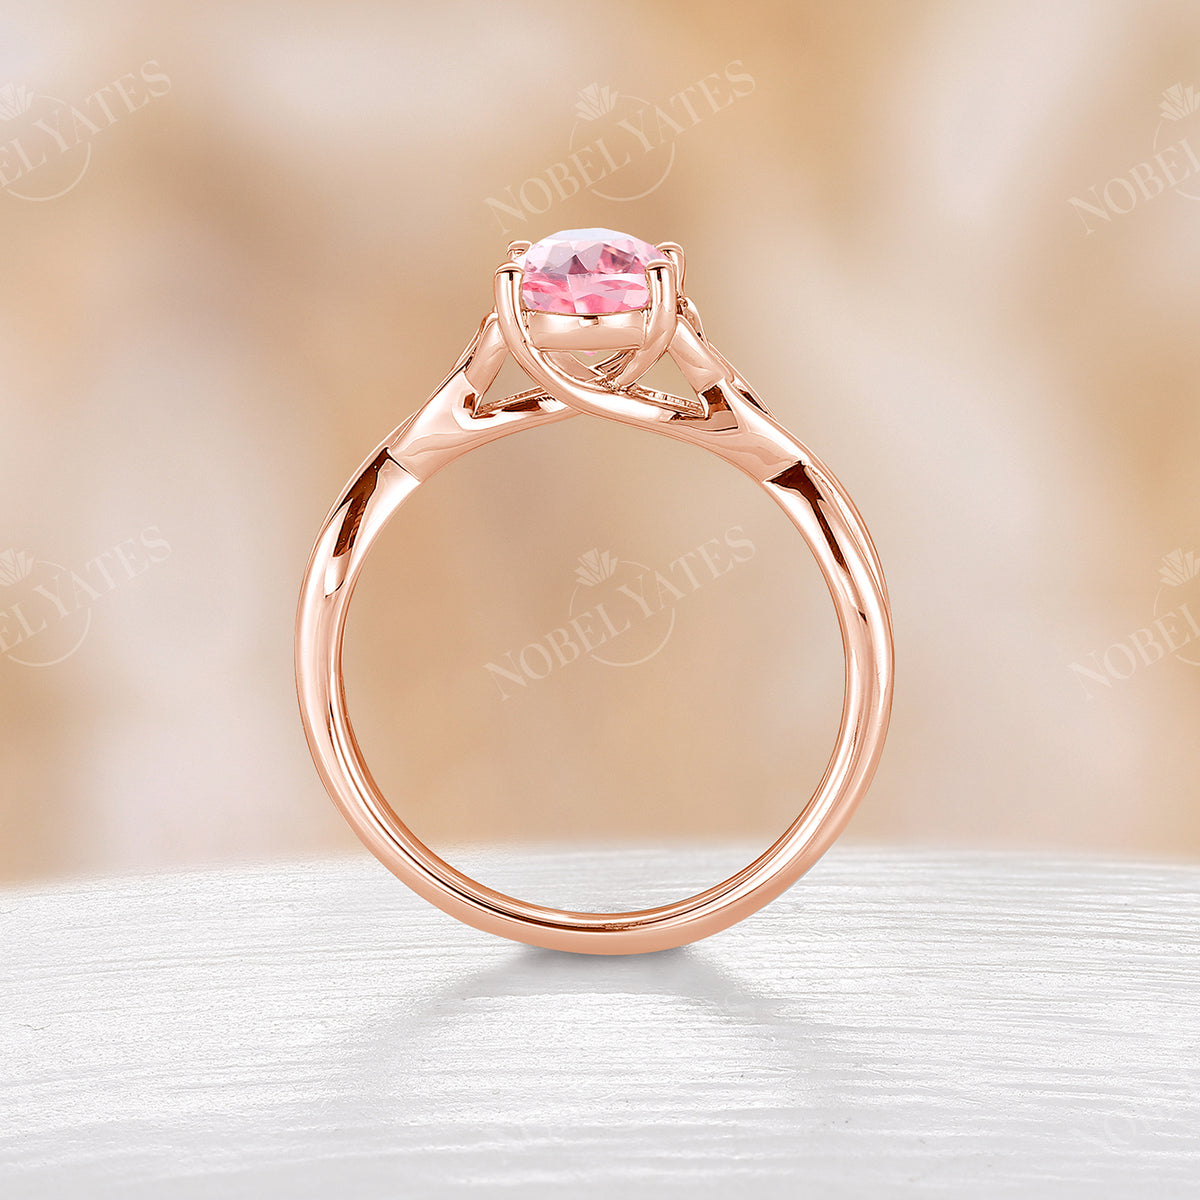 Celtic Pink Padparadscha Engagement Ring Solitaire Rose Gold